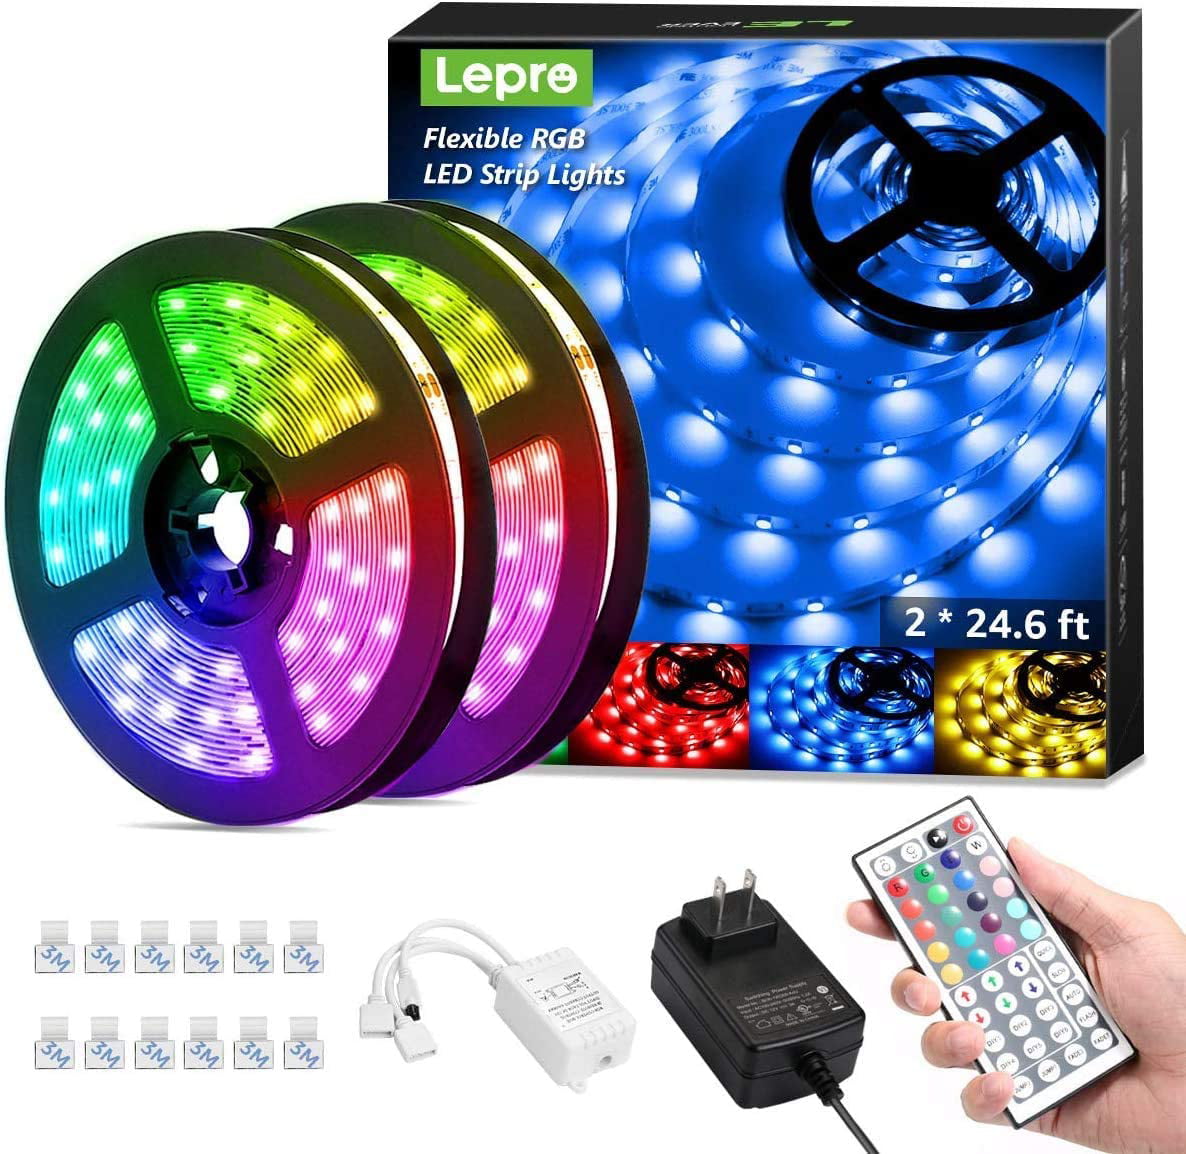 LED Strip Lights 32.8ft With Remote Upgraded Version Flexible RGB 5050 IP65 Waterproof Self Adhesive 300LEDs Rope Lights Multicolor Neon Ribbon LED Tape Lights for Bedroom Kitchen Room Closet Decor 